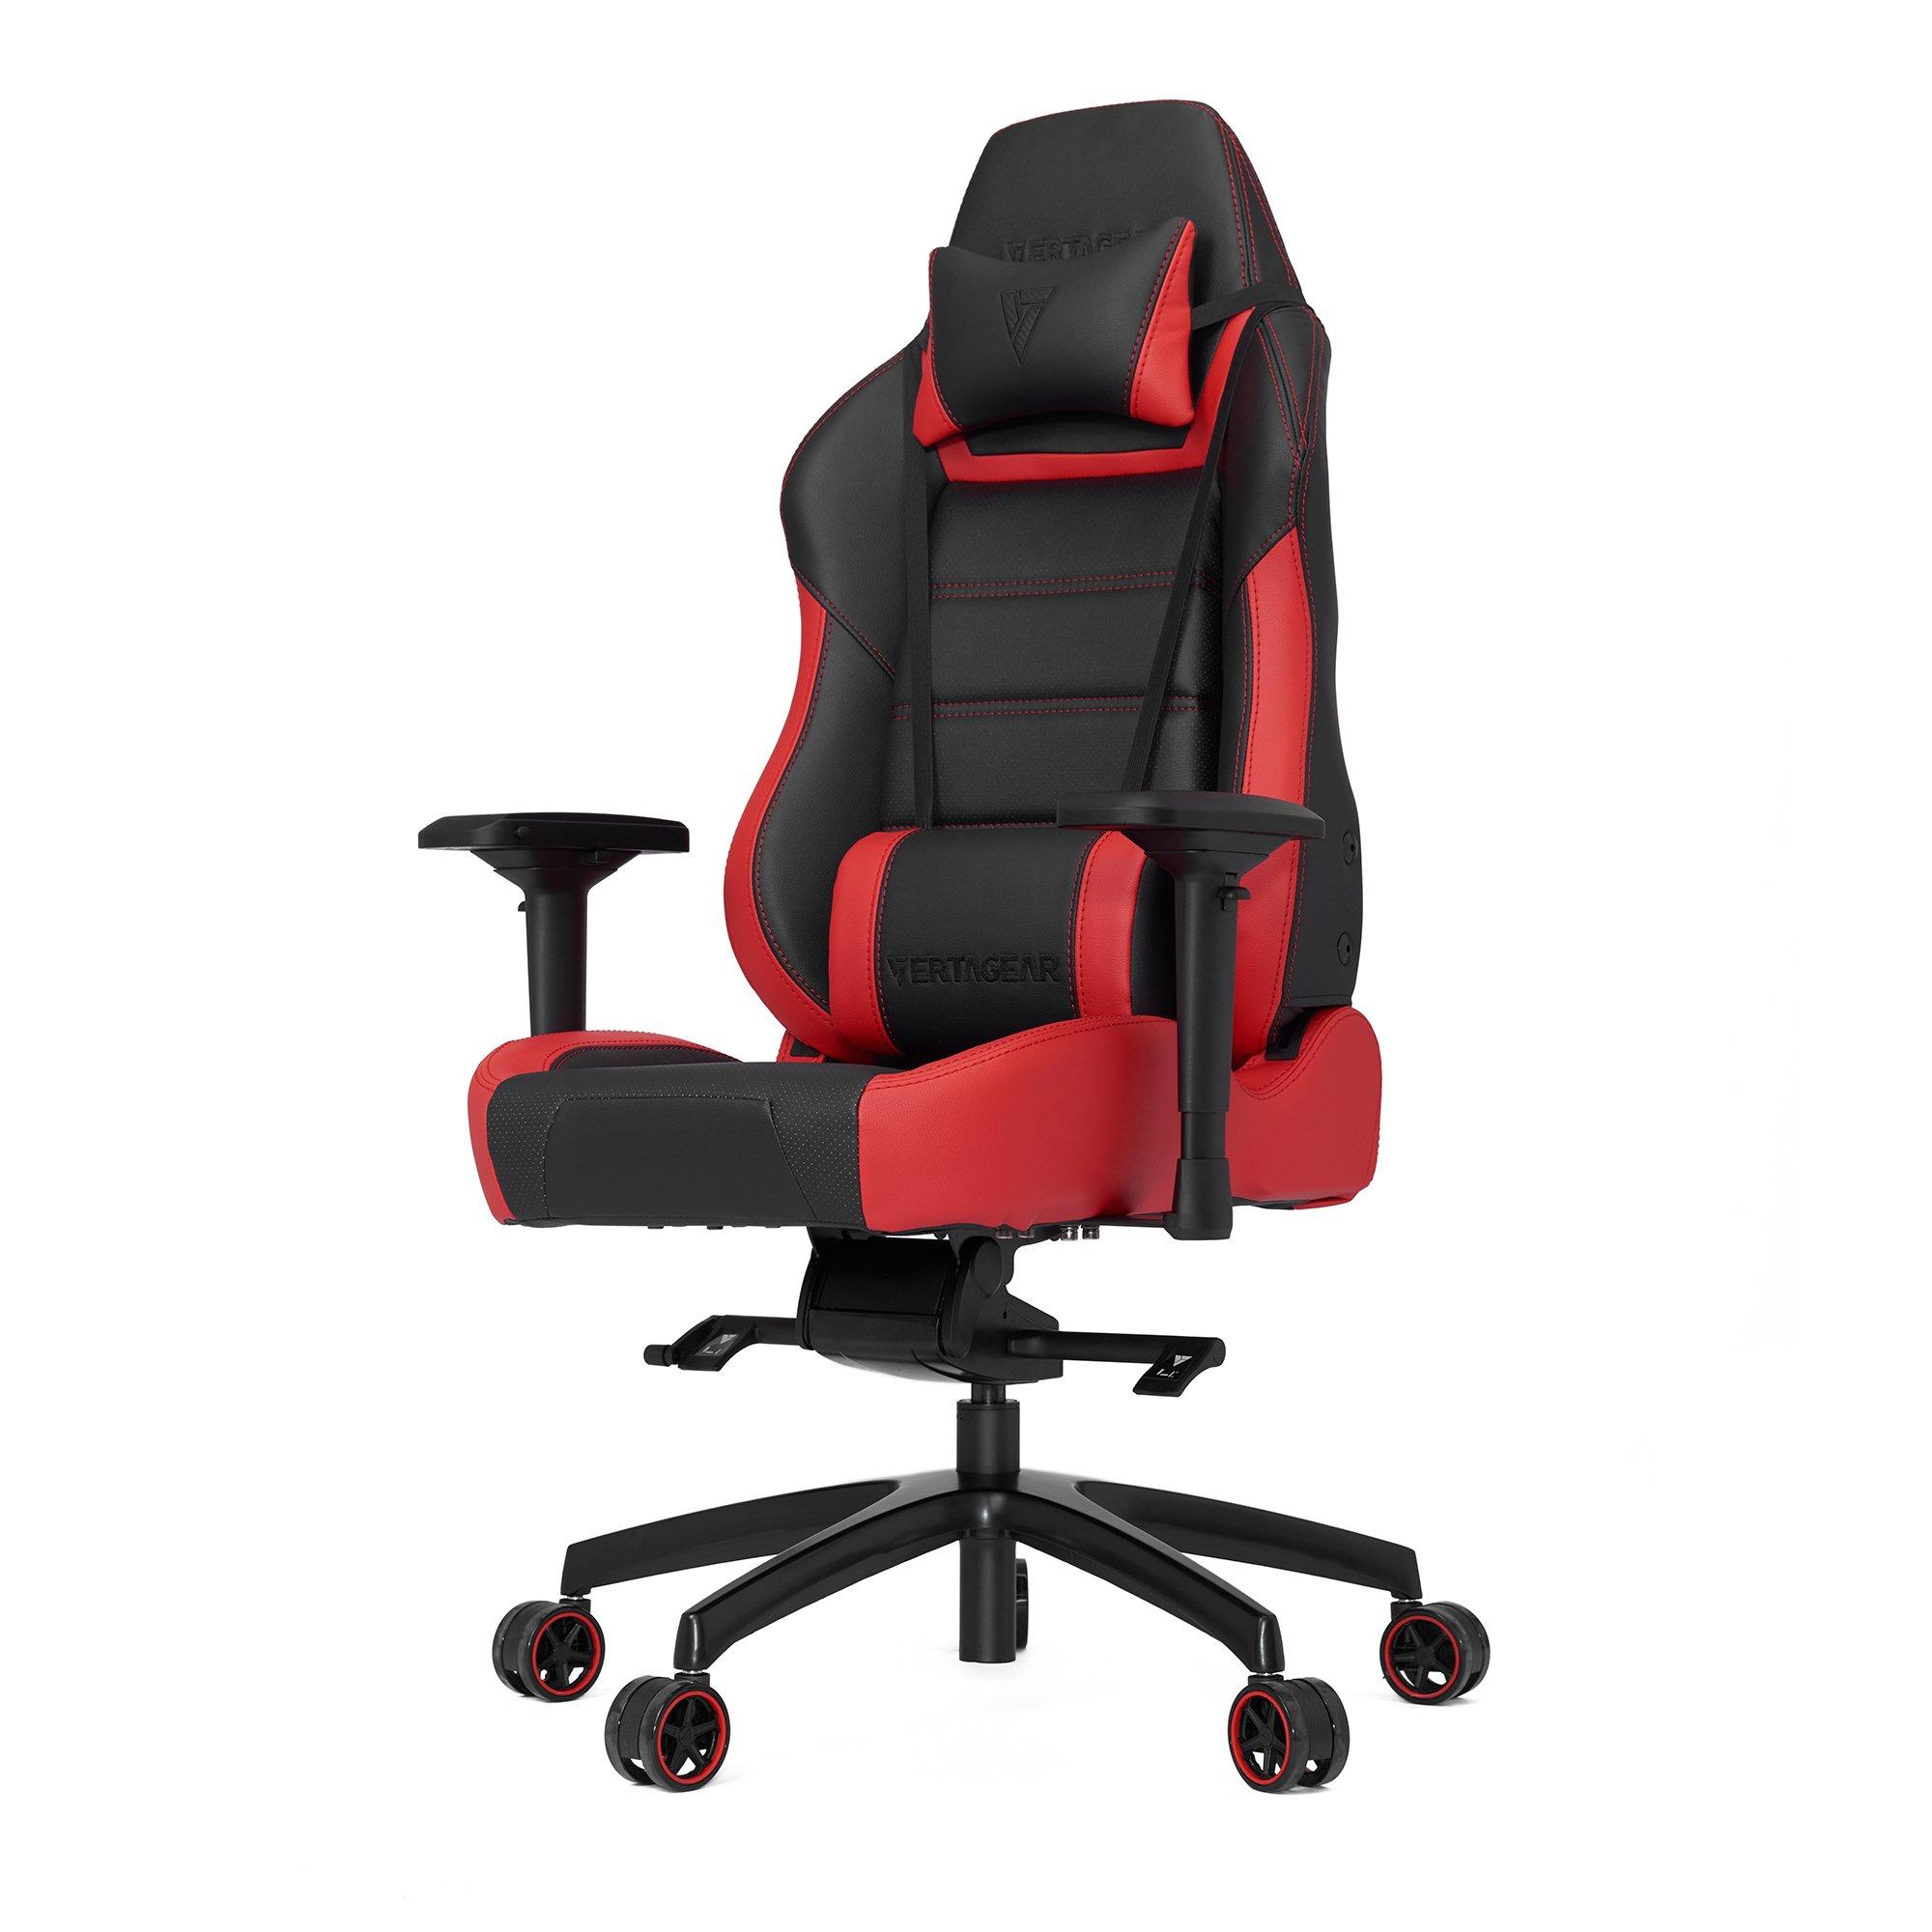 Vertagear PL6000 Black and Red Gaming Chair